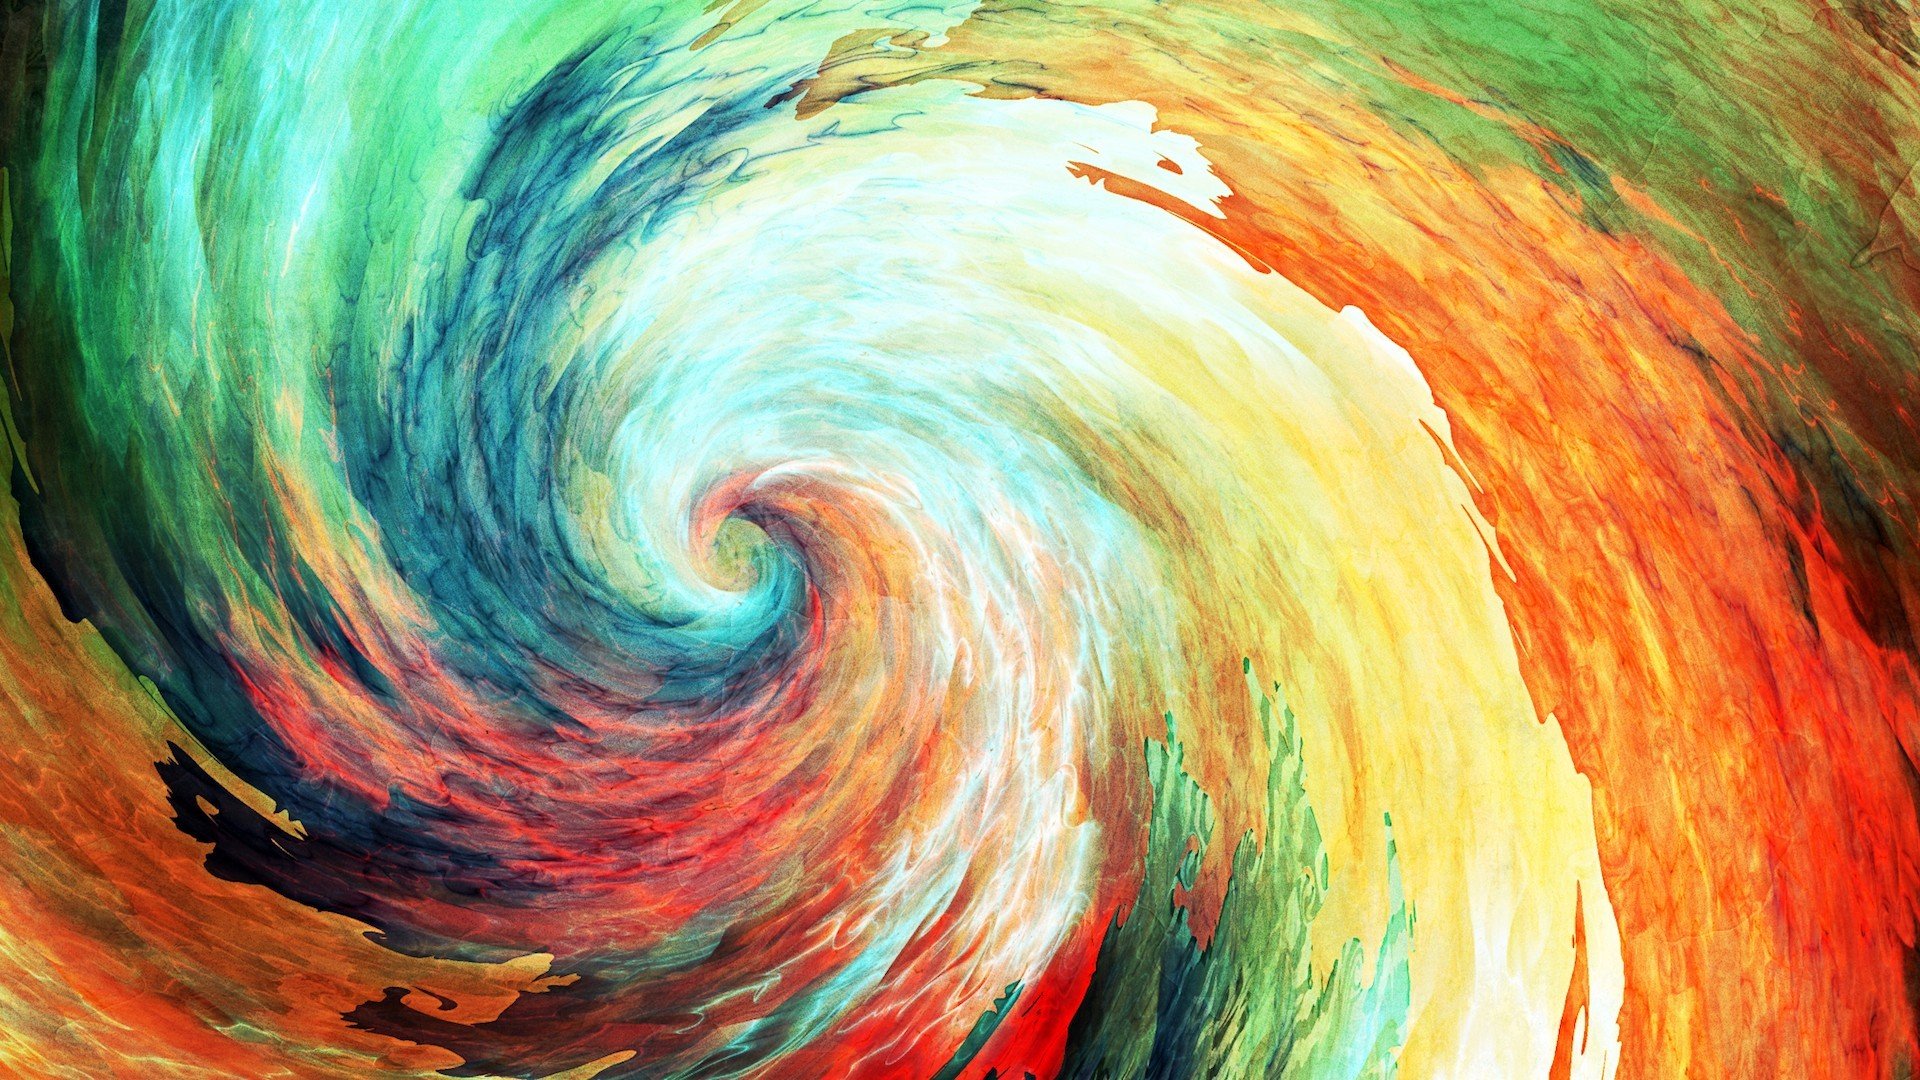 Anime Spiral Abstract Painting Artwork Colorful Hurricane Vortex Psychedelic Vibrant Wallpaper:1920x1080